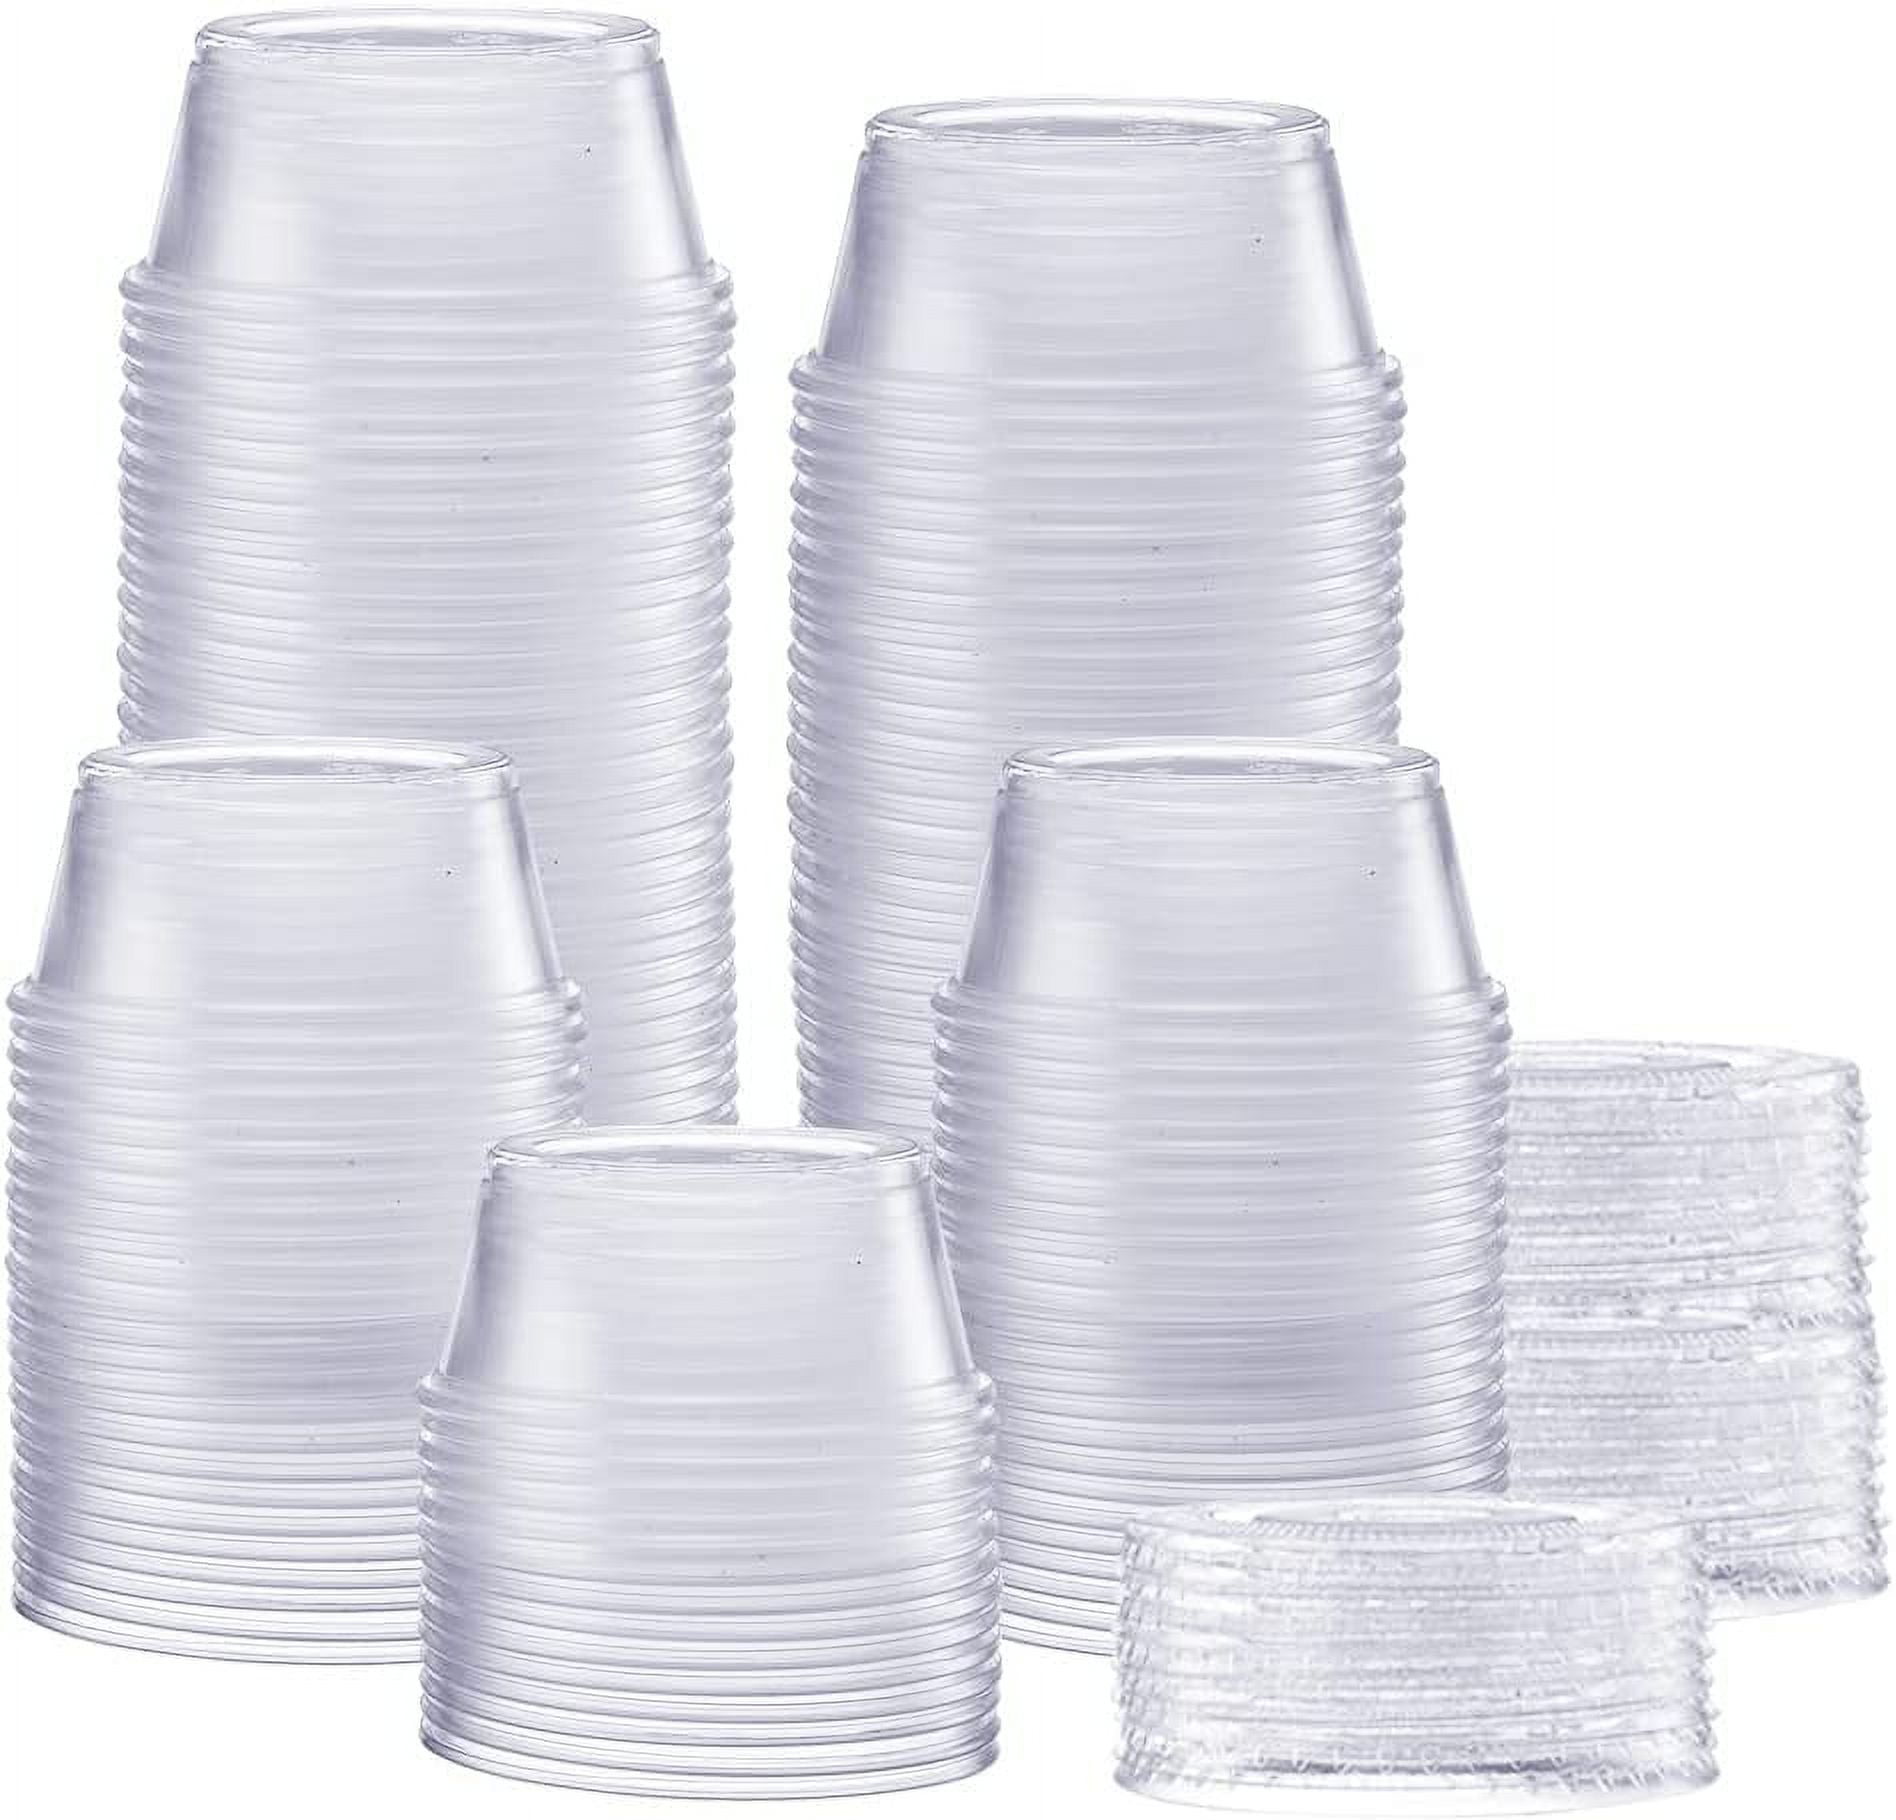 Turbo Bee 200 Sets 1oz Portion Cups with Lids,Jello Shot Cups with Lids, Small  Plastic Condiment Containers for Sauce,Souffle Cups 1oz-pc-200